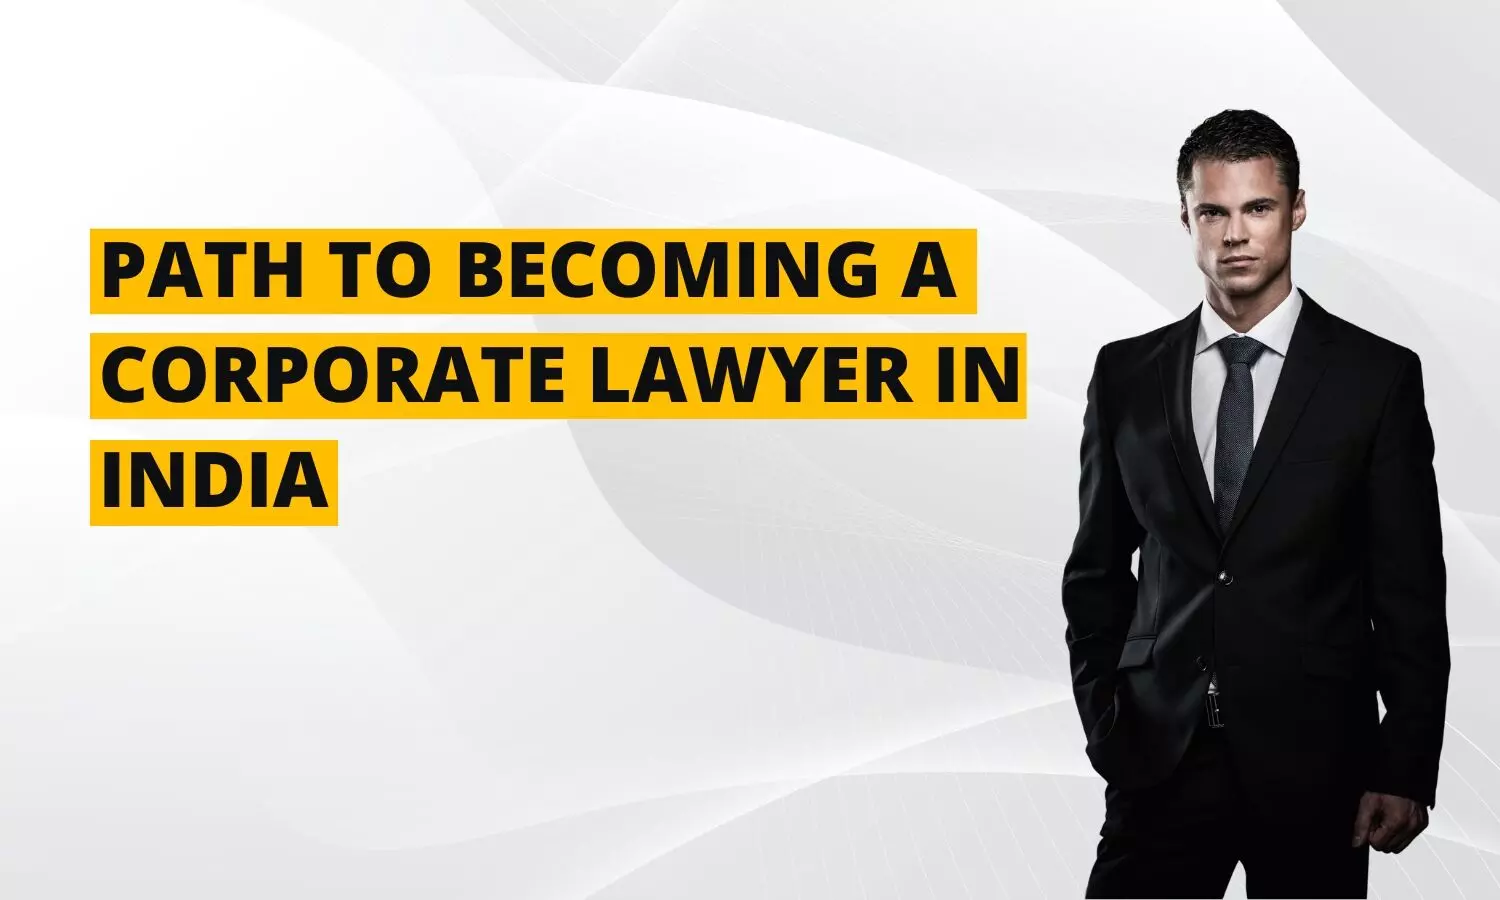 The Path to Becoming a Corporate Lawyer in India